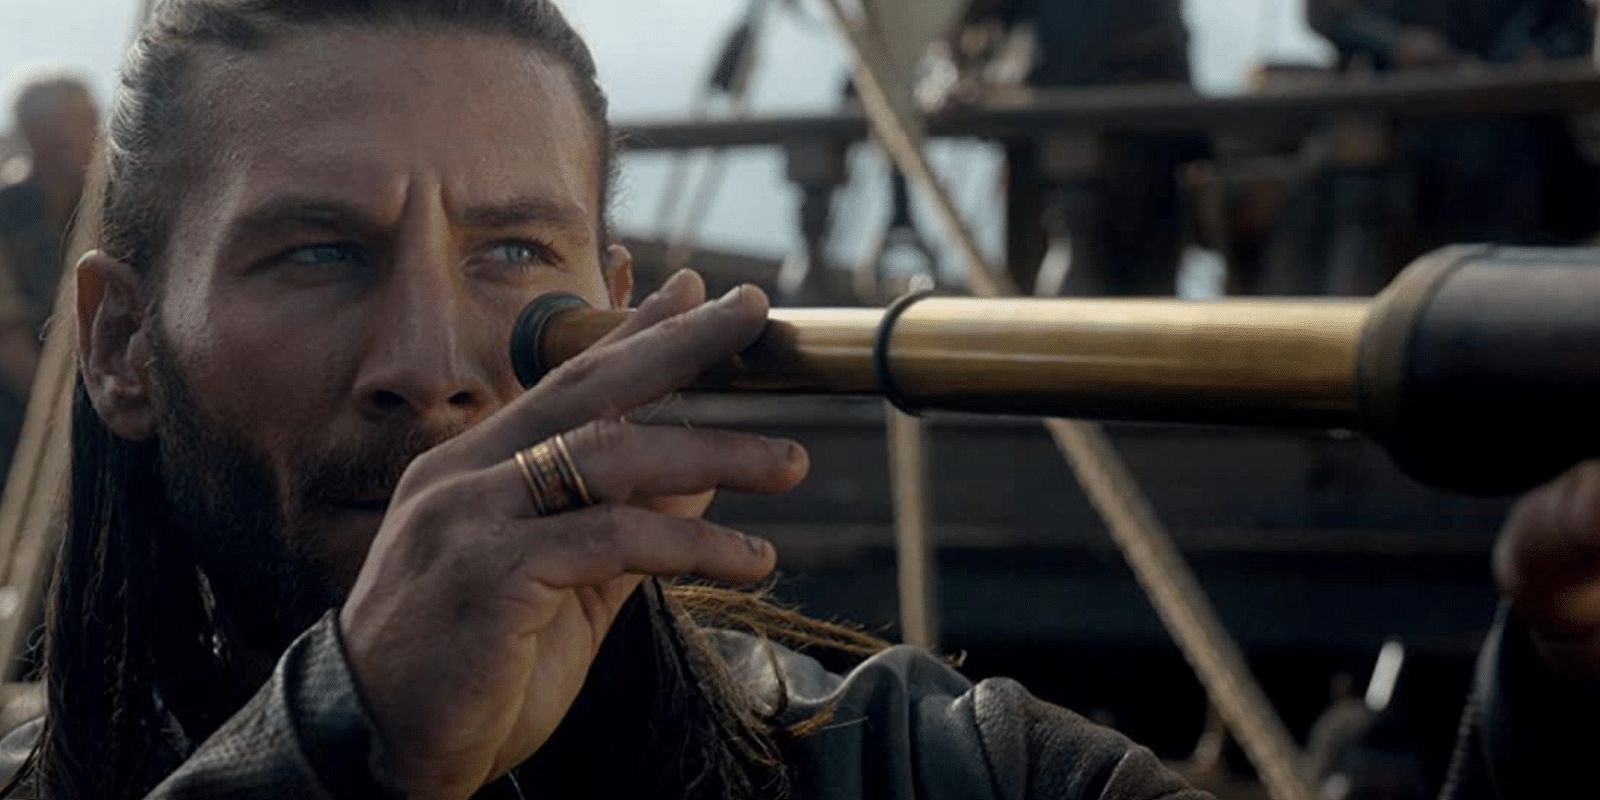 Black Sails: The True Story Of Pirate Charles Vane & Why He Was So Famous